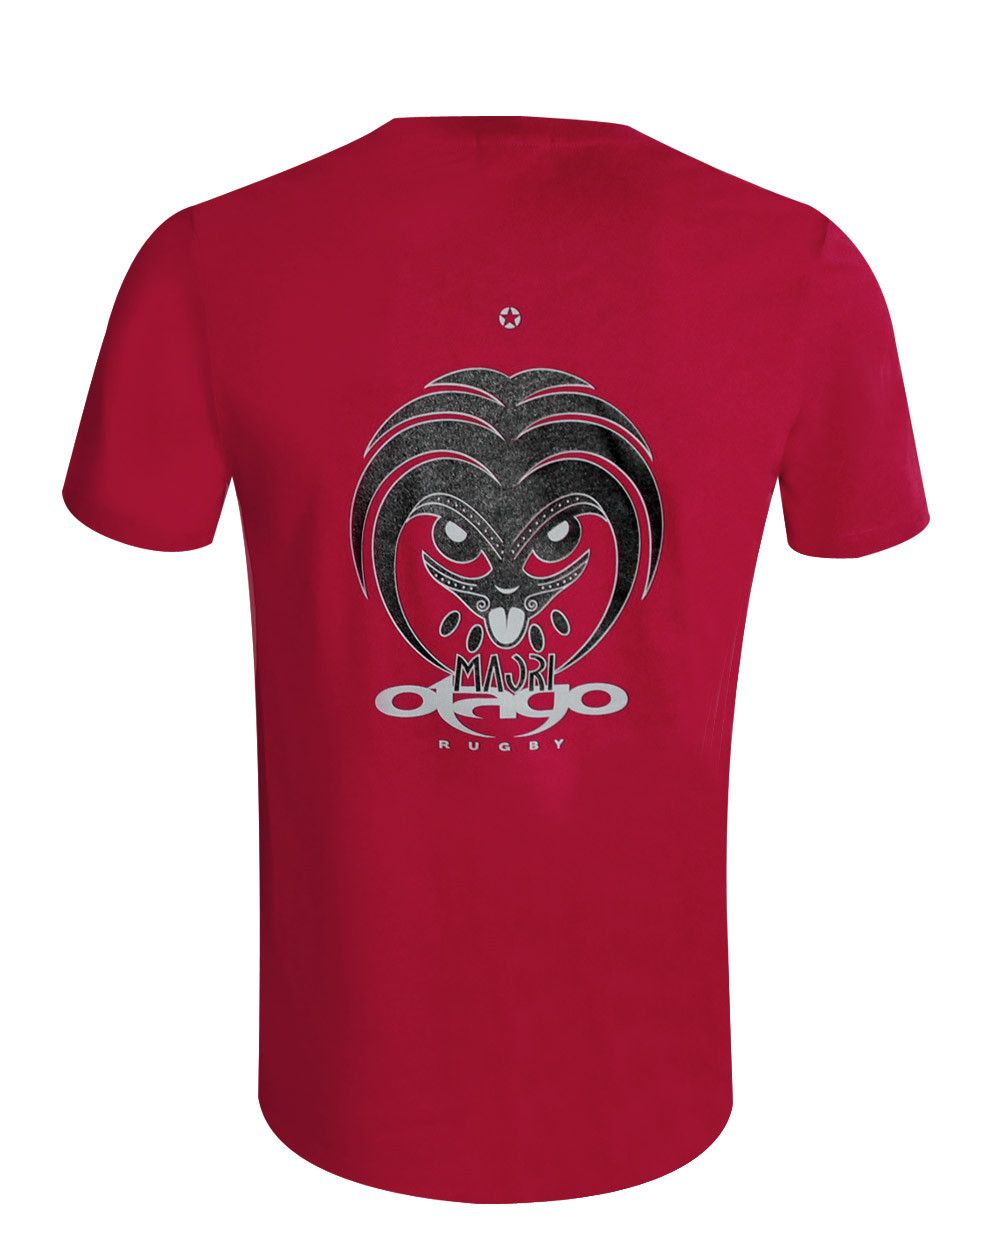 Tee shirt LANG Otago rugby hibiscus red pour homme